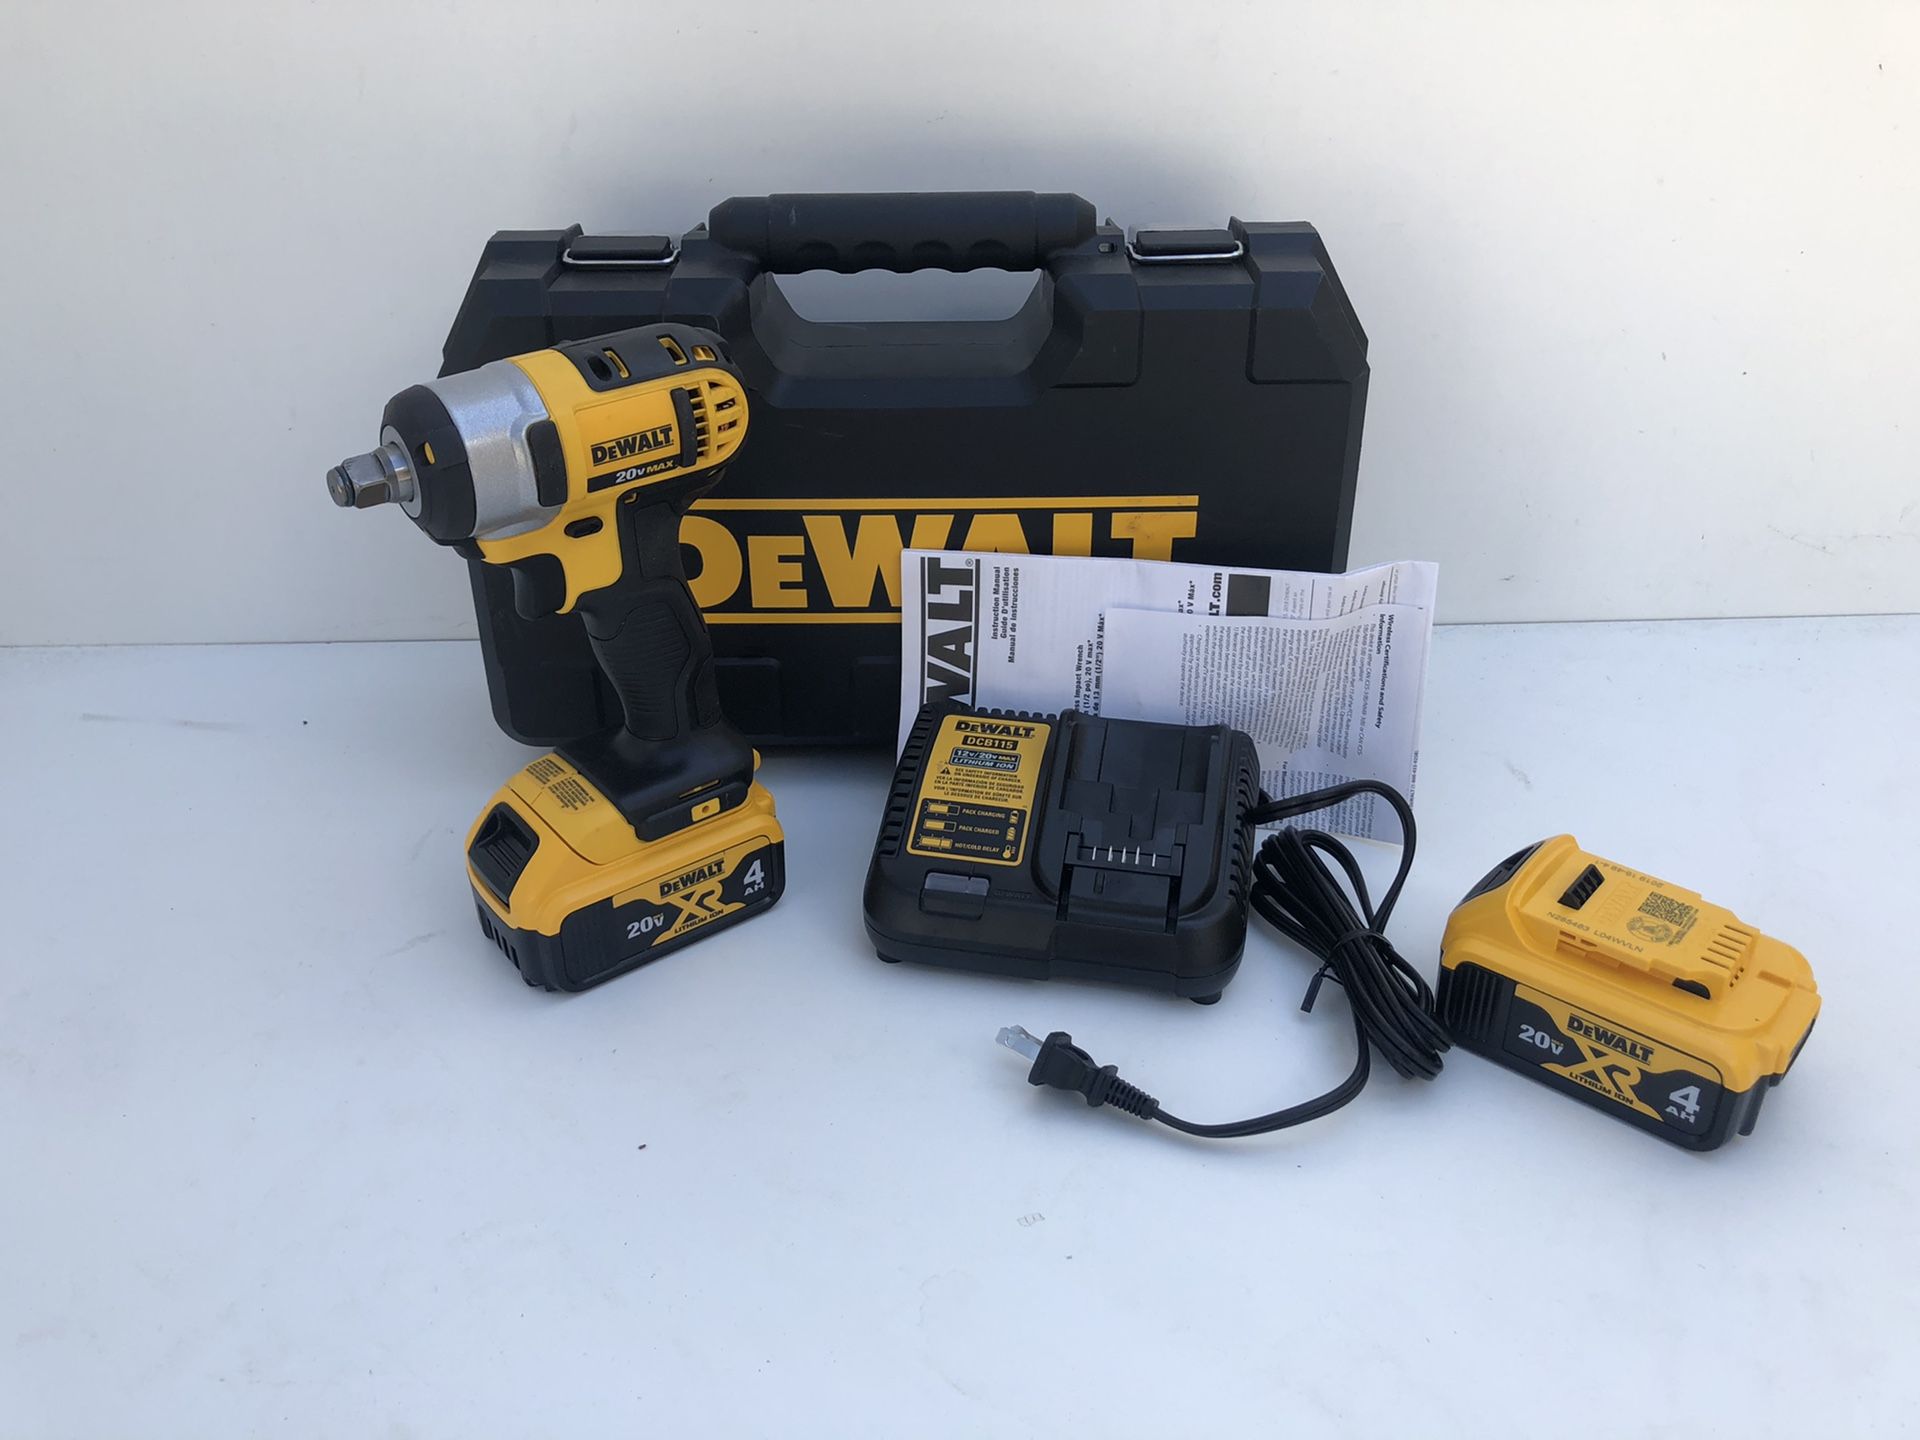 DEWALT 20-Volt MAX Lithium-Ion Cordless 1/2 in. Impact Wrench Kit with (2) Batteries 4Ah, Charger and Tool Bag